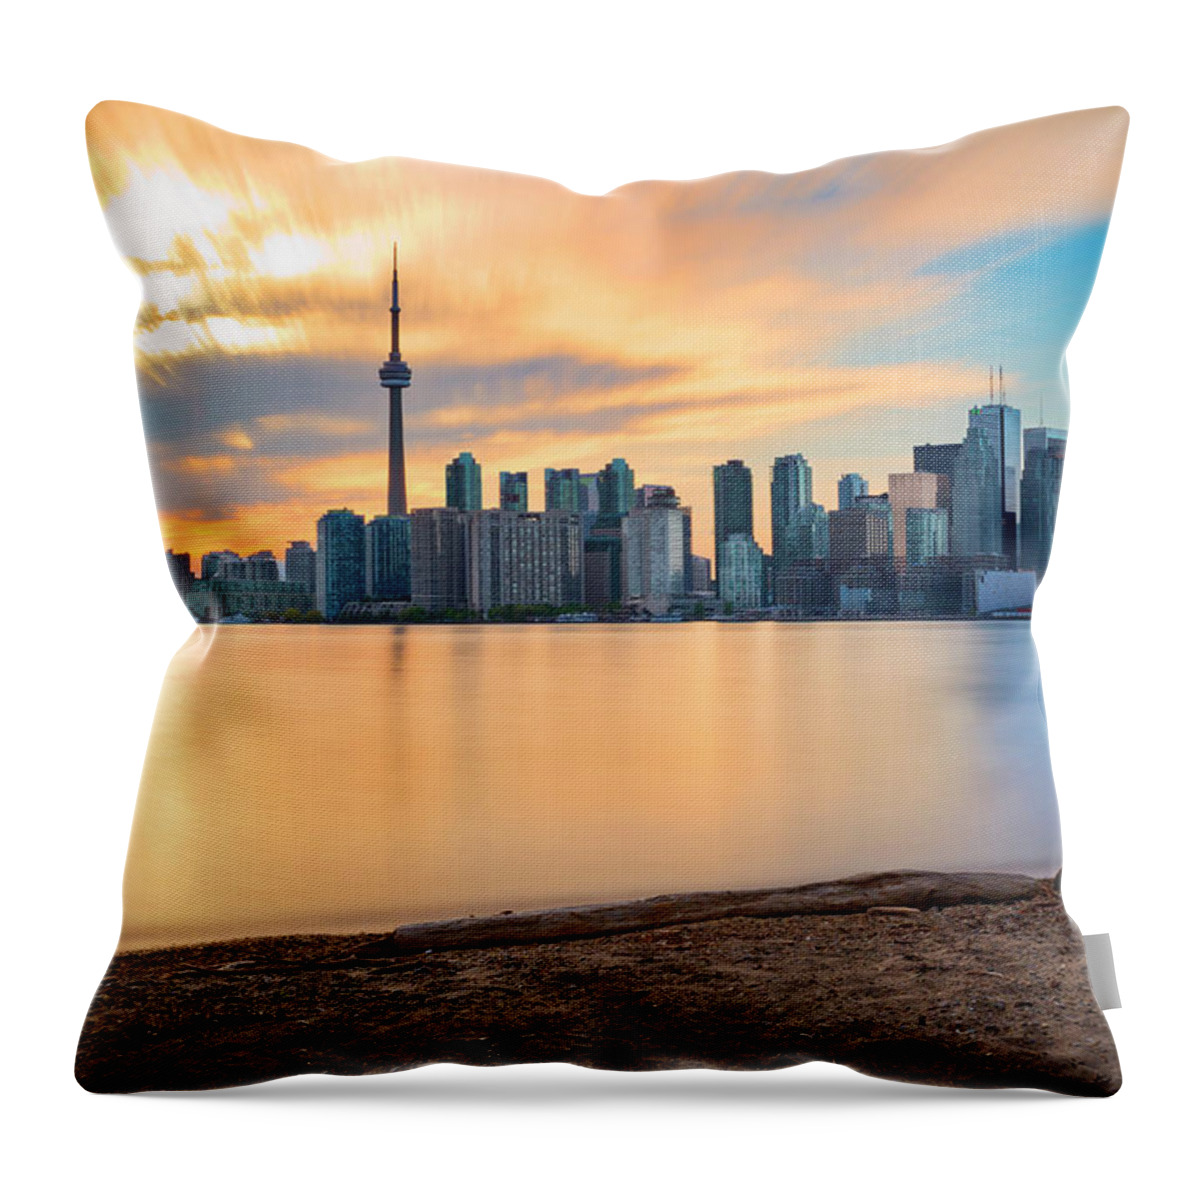 Estock Throw Pillow featuring the digital art Canada, Toronto, Skyline At Sunset #4 by Pietro Canali